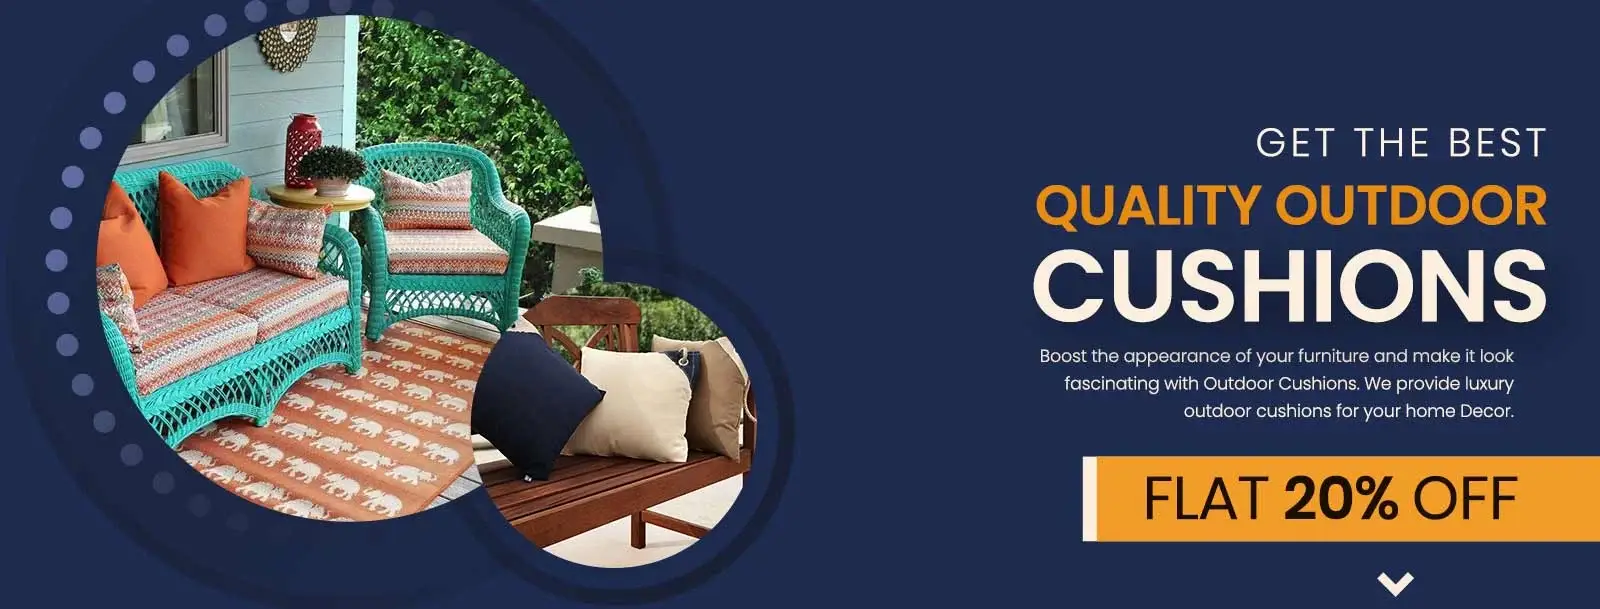 Best Quality Outdoor Cushions